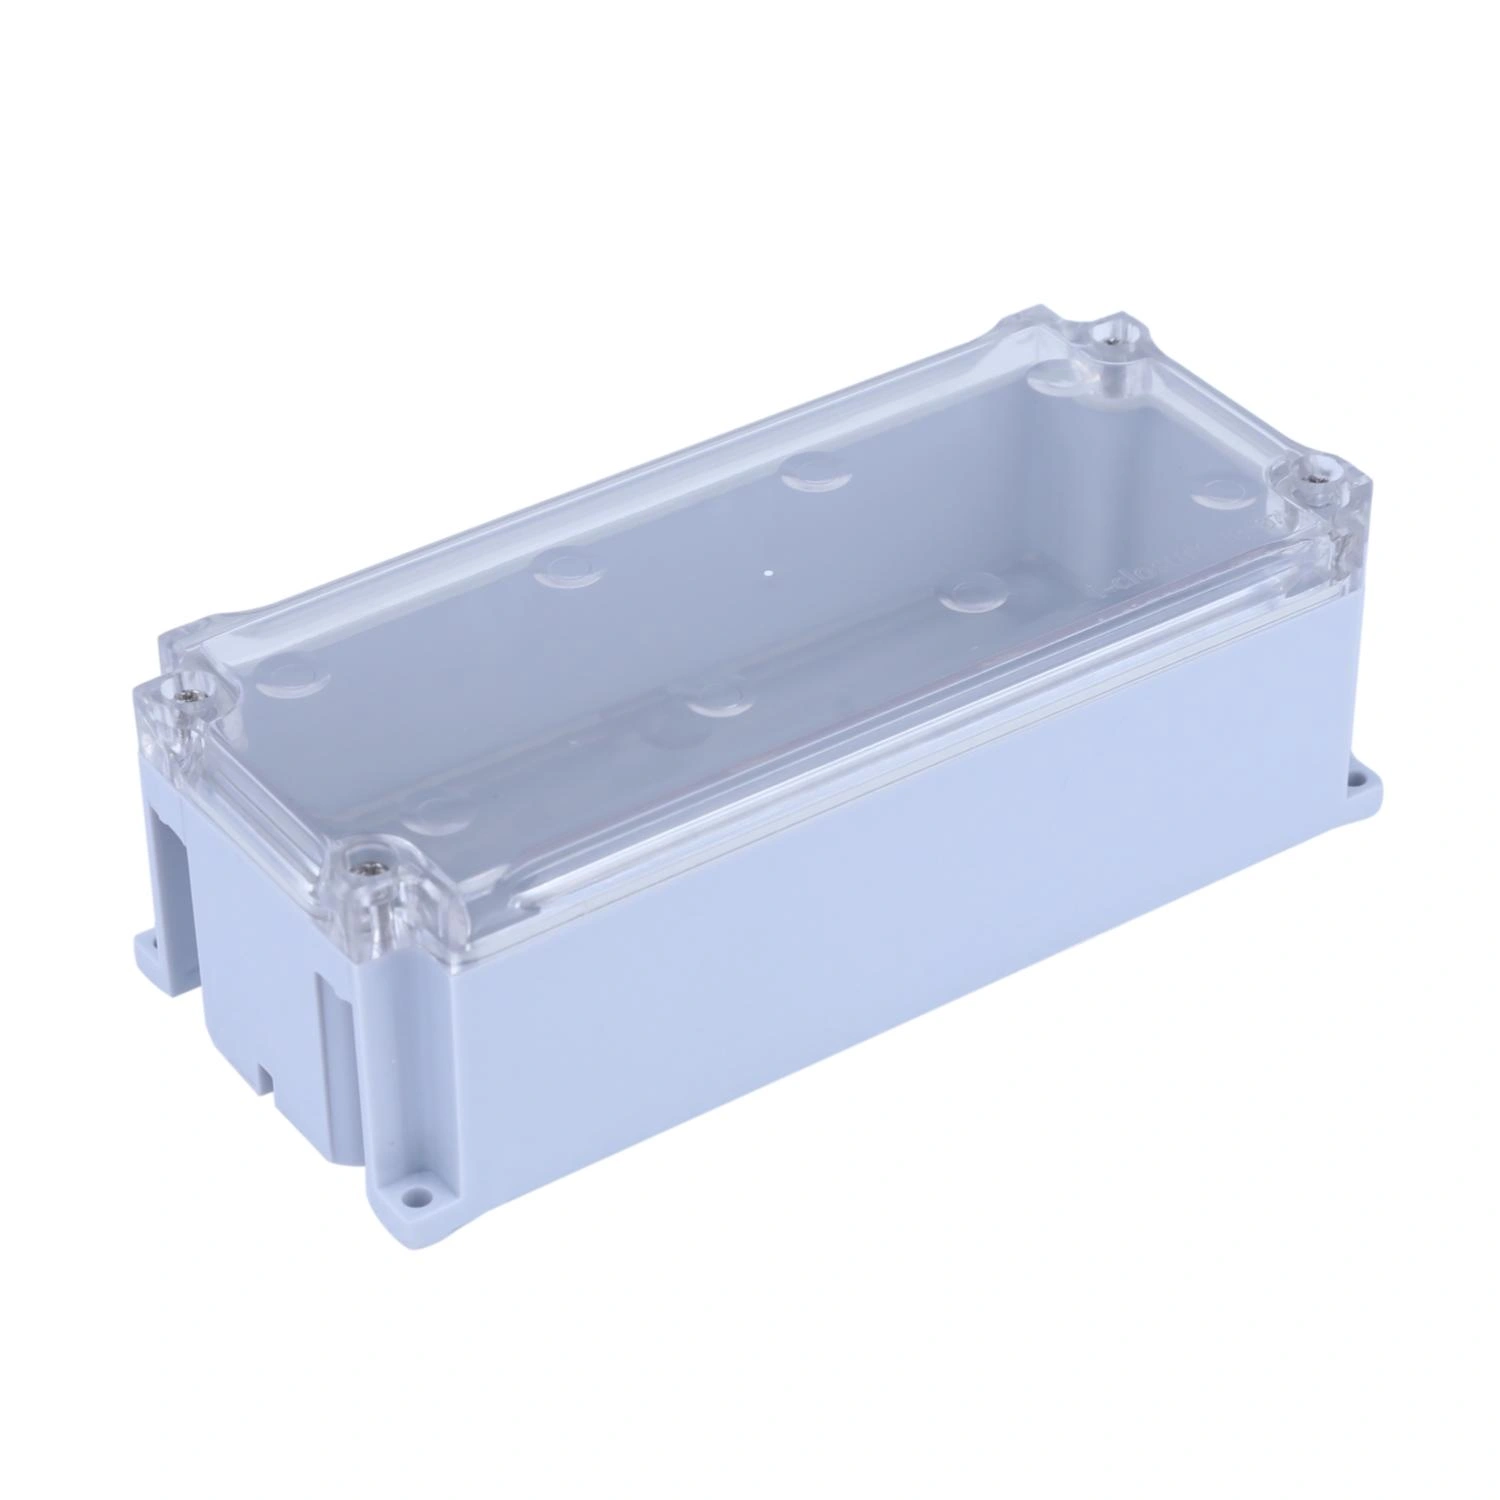 ABS Enclosure 180 x 80 x 55 mm Clear IP67-2